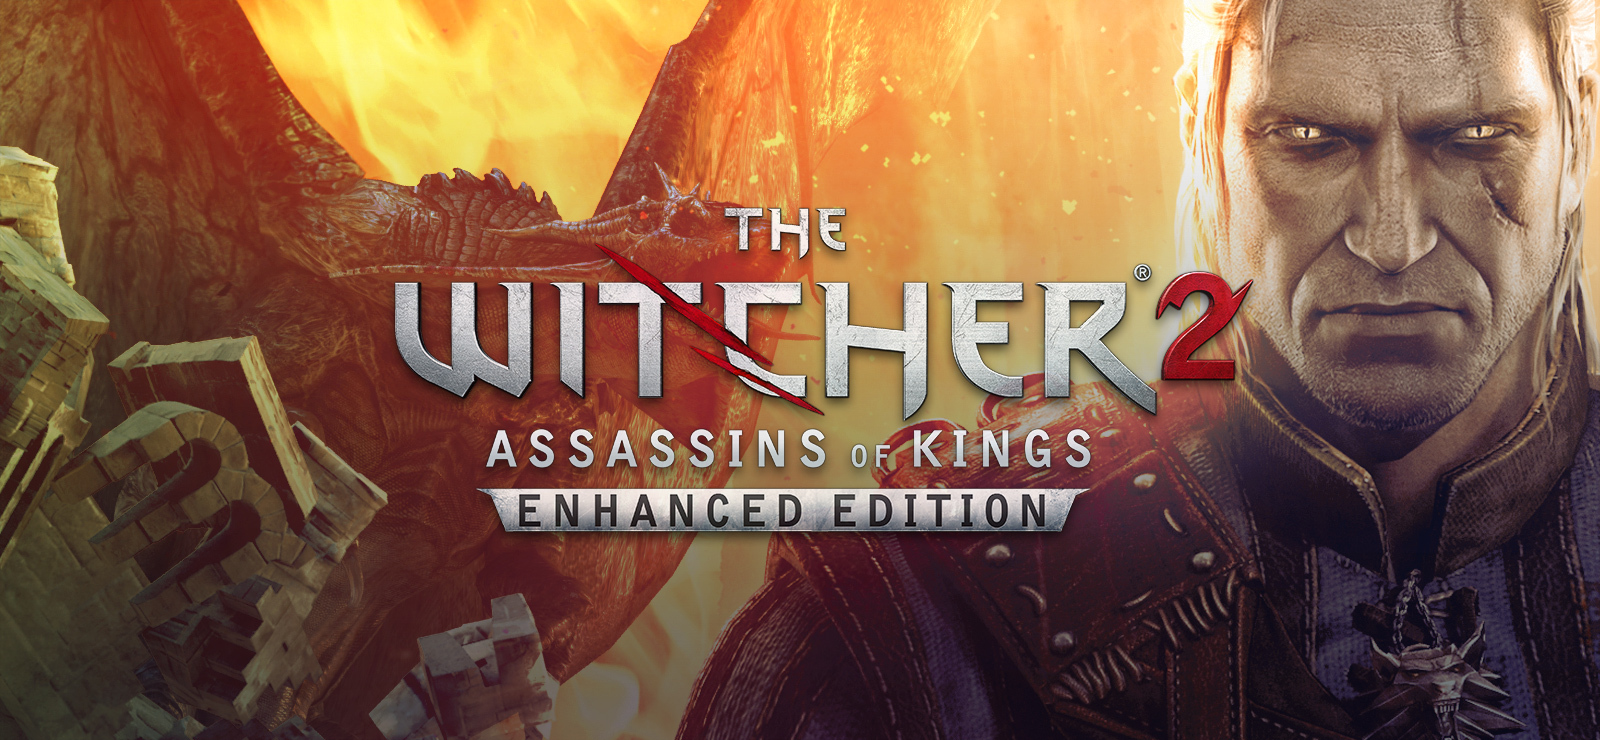 The Witcher 2: of Kings Enhanced Edition on GOG.com